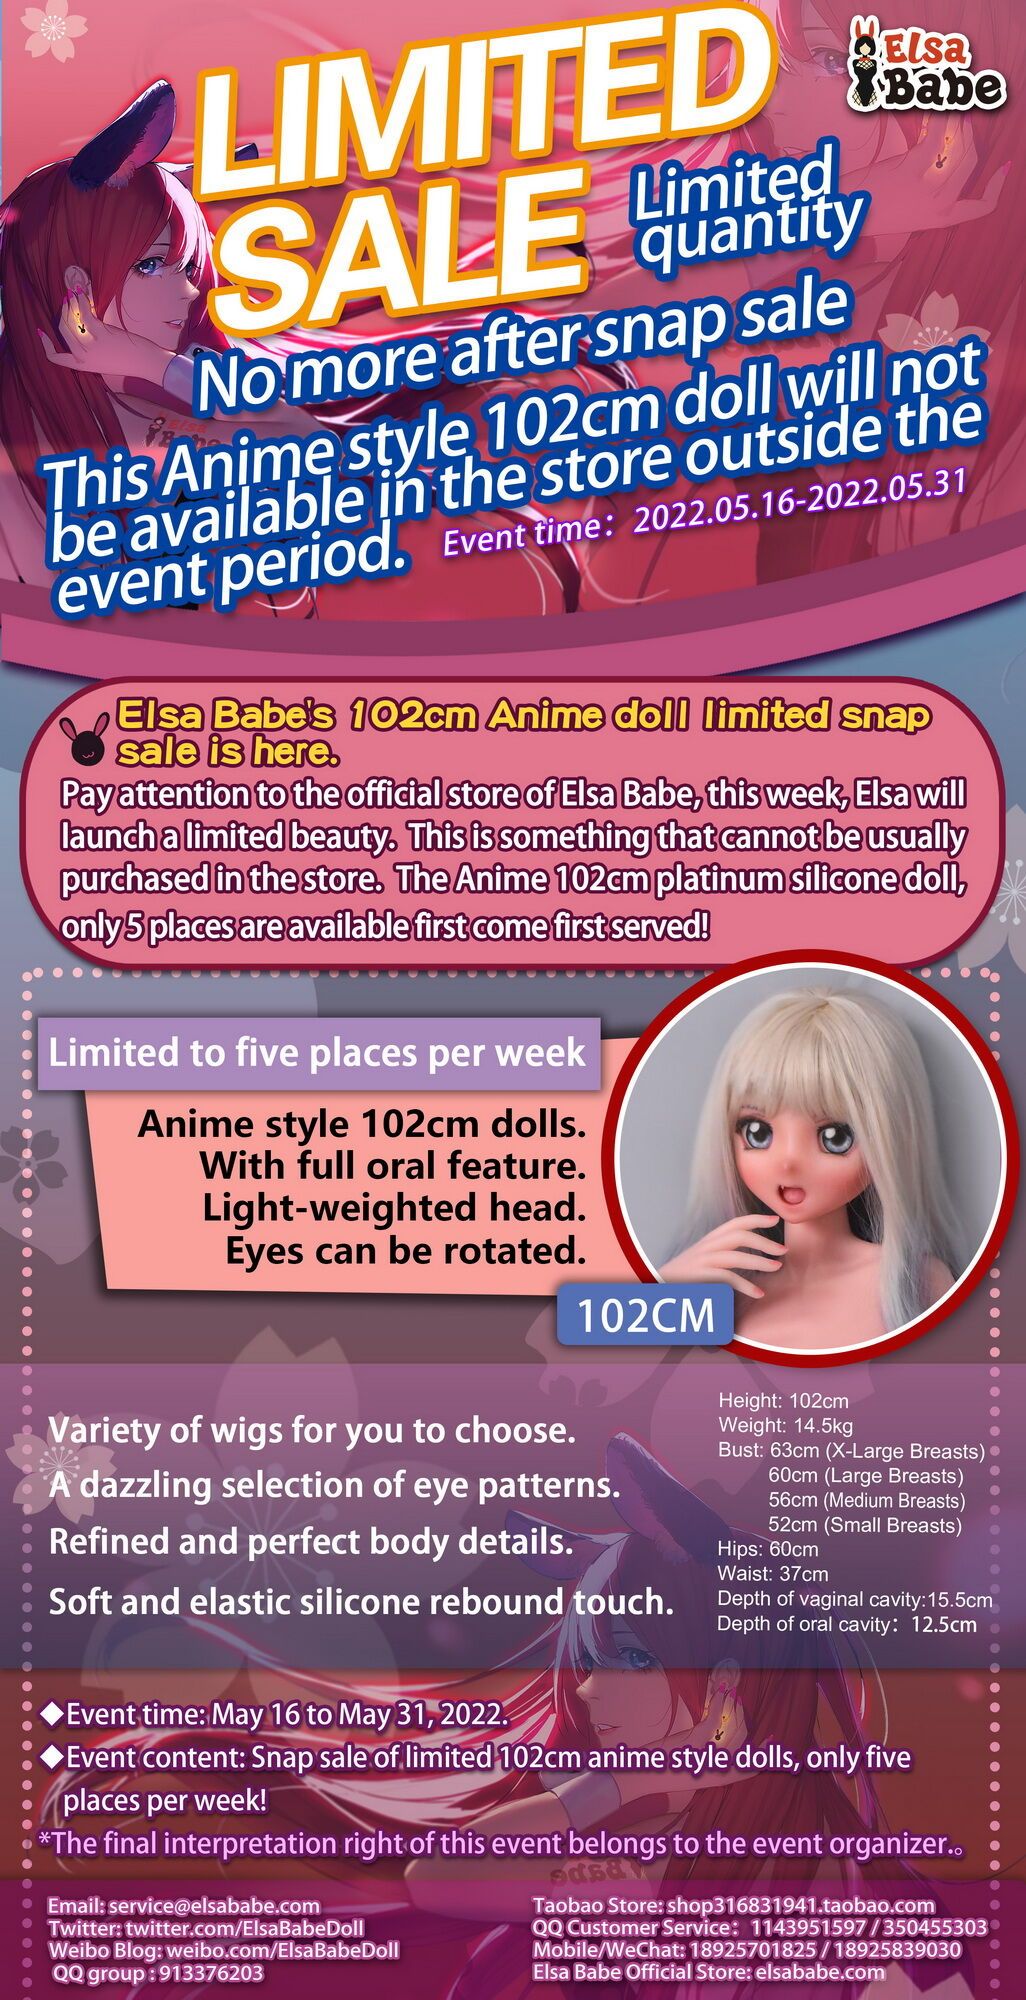 Elsa Babe-The limited Anime 102cm doll snap-up event with only five places, first come first served! 2022.05.16 2